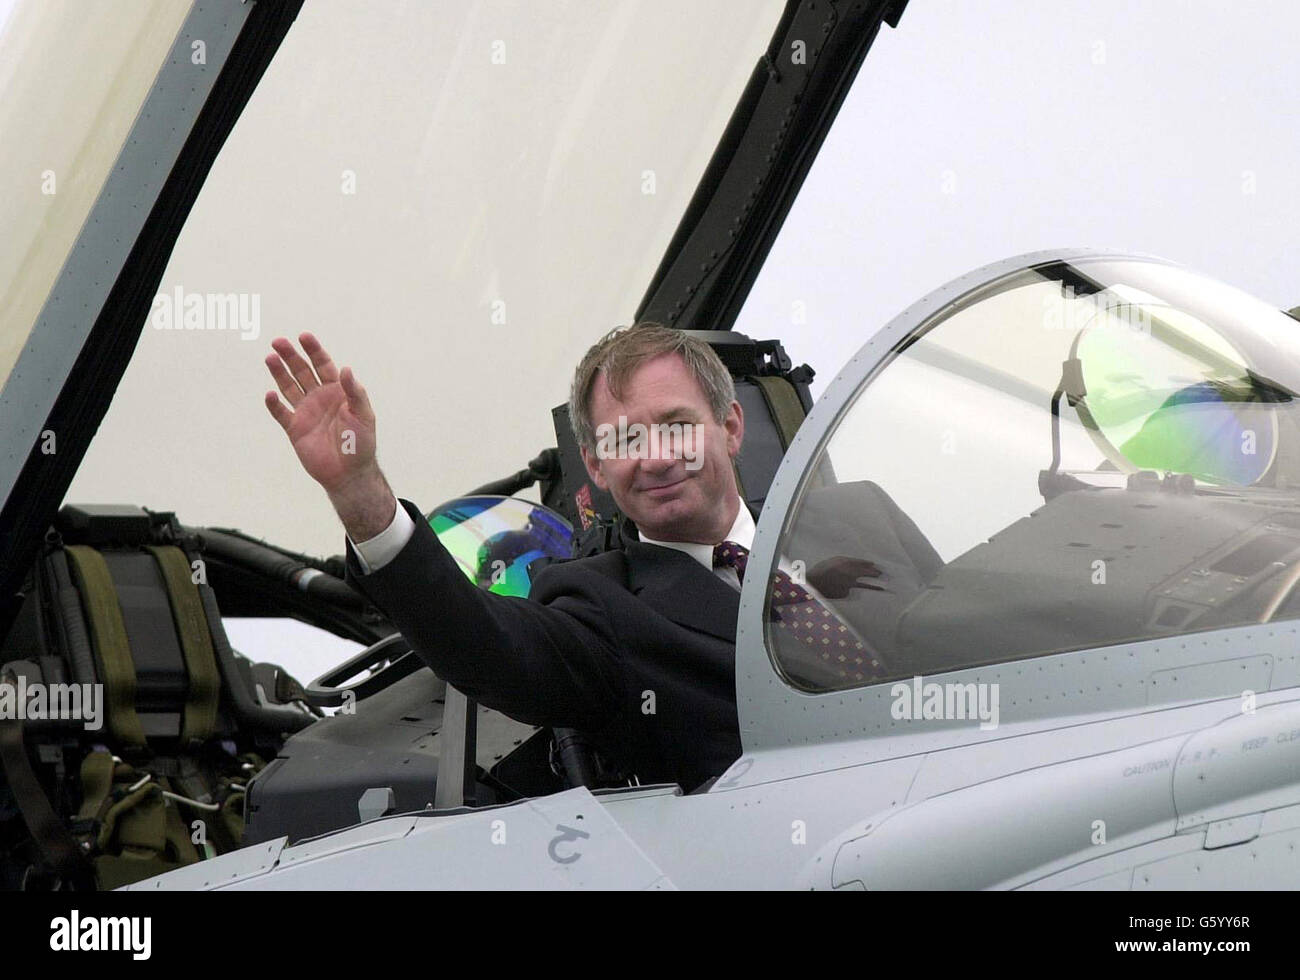 Defence Minister Geof Hoon seated in the Typhoon which he officially named. Four RAF Eurofighters fly over Farnborough Airshow in a display before the plane was officically named Typhoon by Mr Hoon. The first Typhoon is due to be delivered to the RAF by the end of this year. *....Mr Hoon, accompanied by the Chief of the Air Staff, Air Chief Marshall Sir Peter Squire and the Chief of Defence Procurement, Sir Robert Walmsley, met Typhoon's air crew, Craig Penrice and Wing Commander David 'Charlie' Chan after the formation flypast. Stock Photo